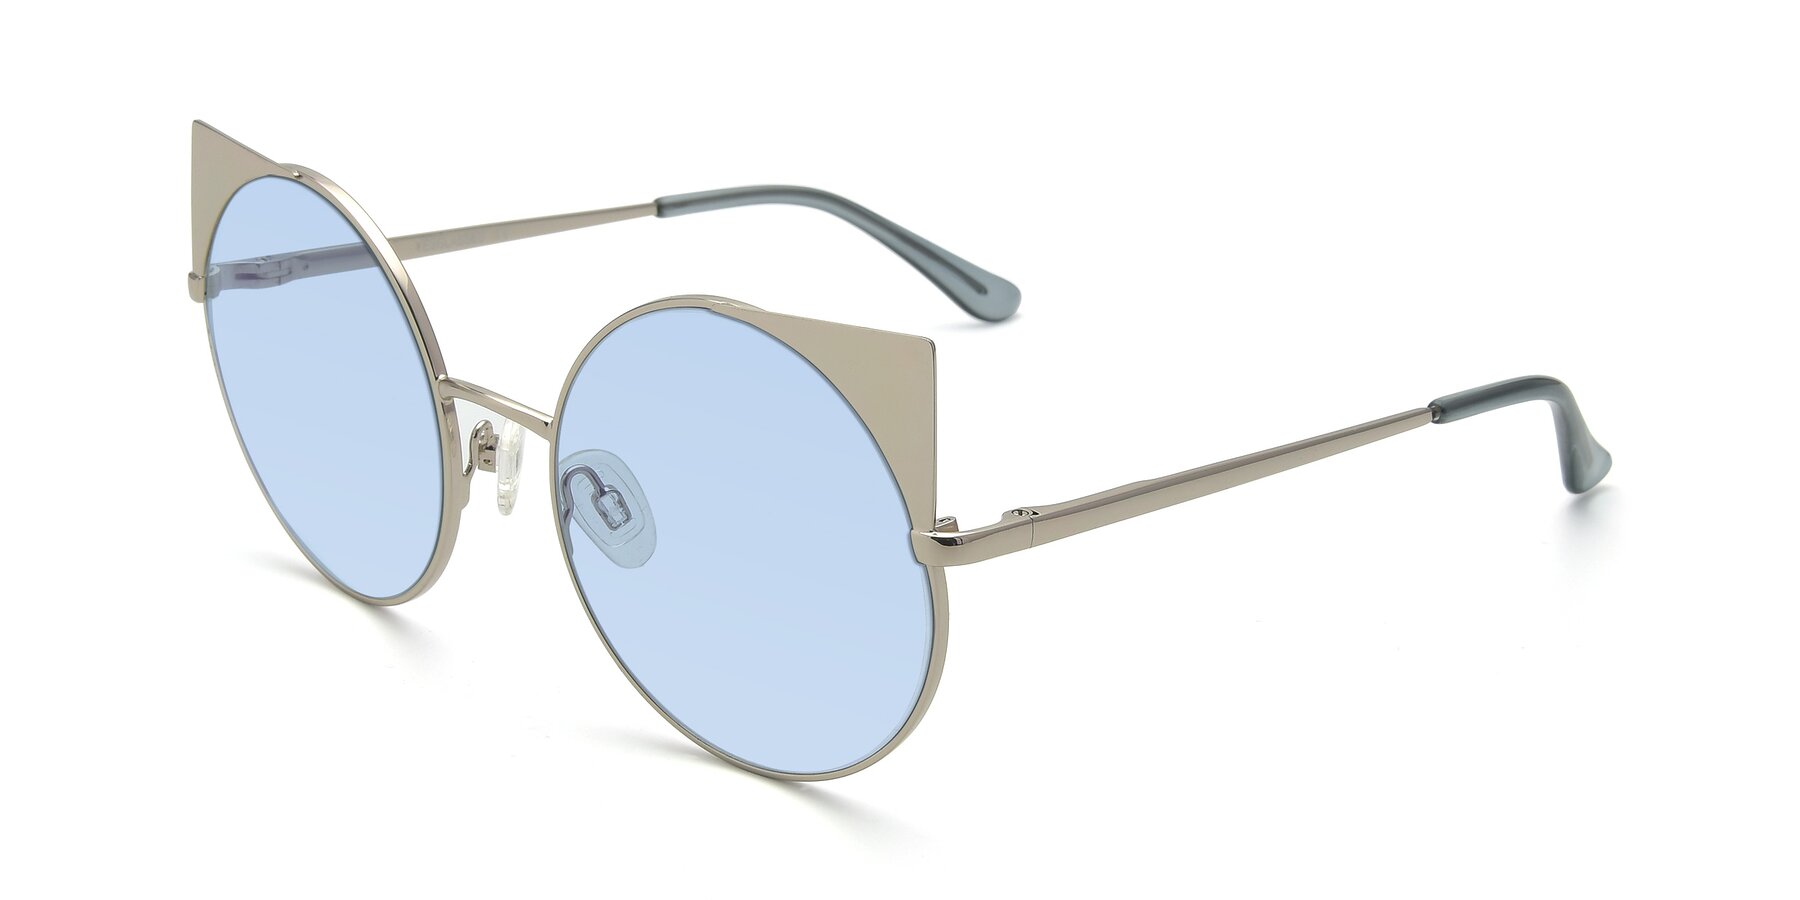 Angle of SSR1955 in Silver with Light Blue Tinted Lenses